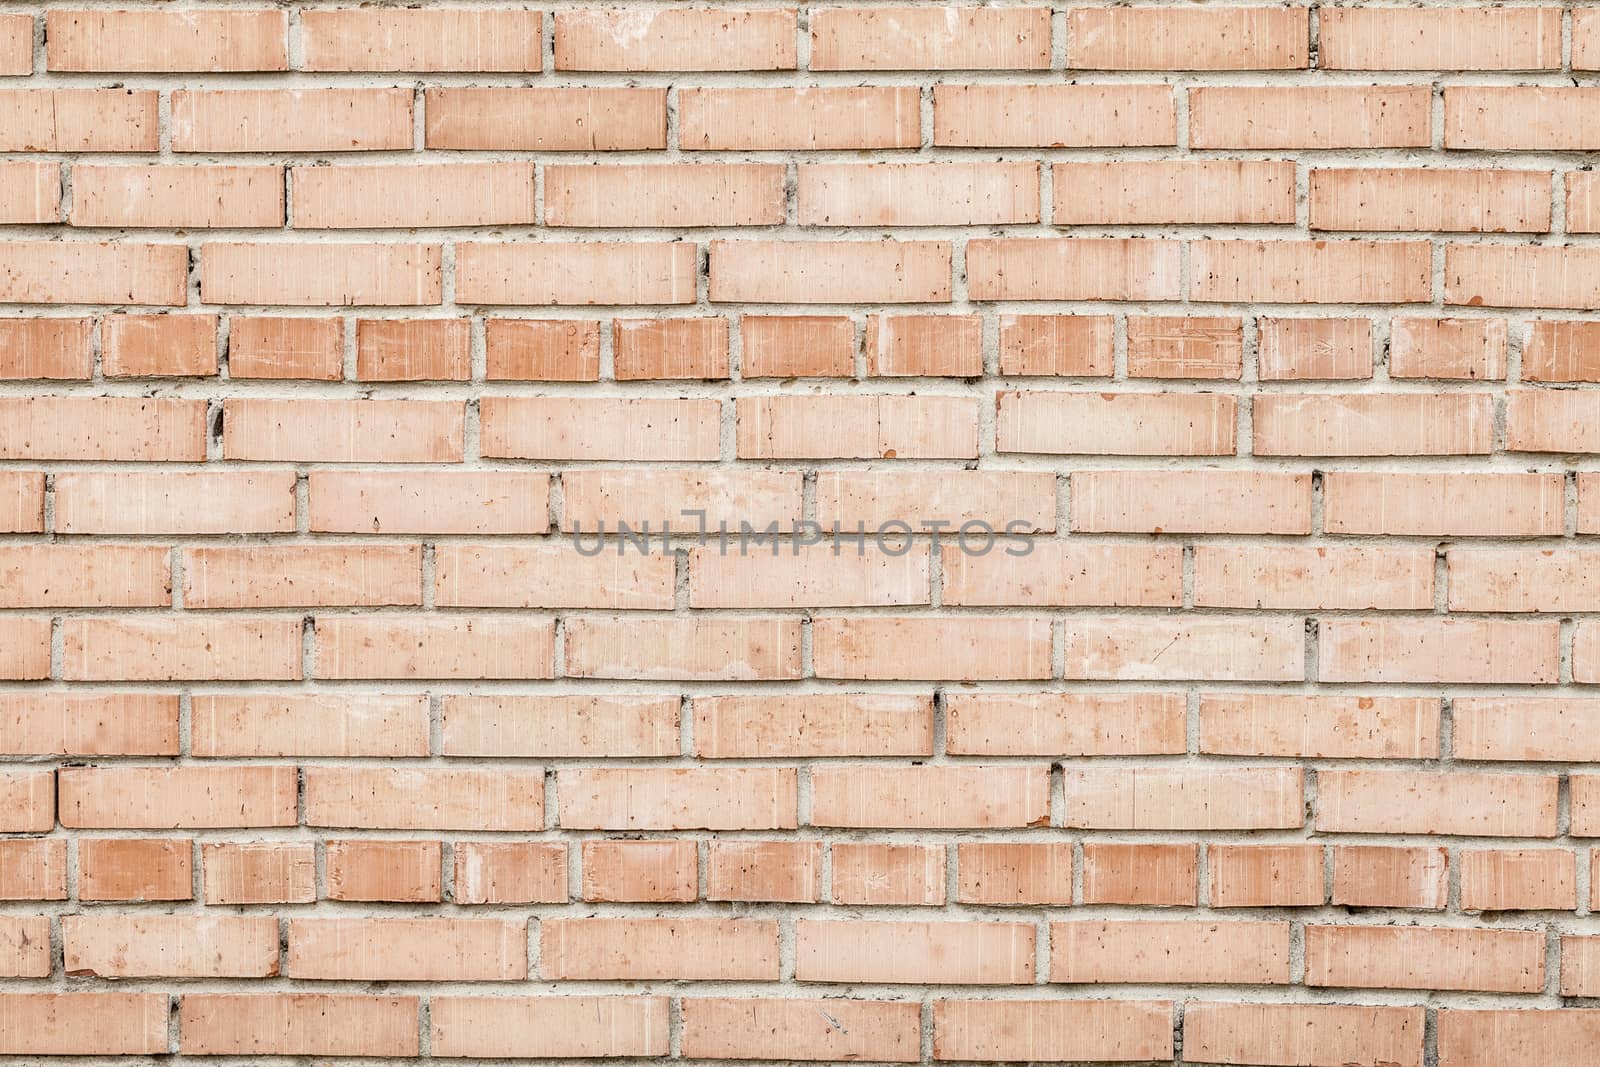 The Weathered Old Red Brick Wall Background